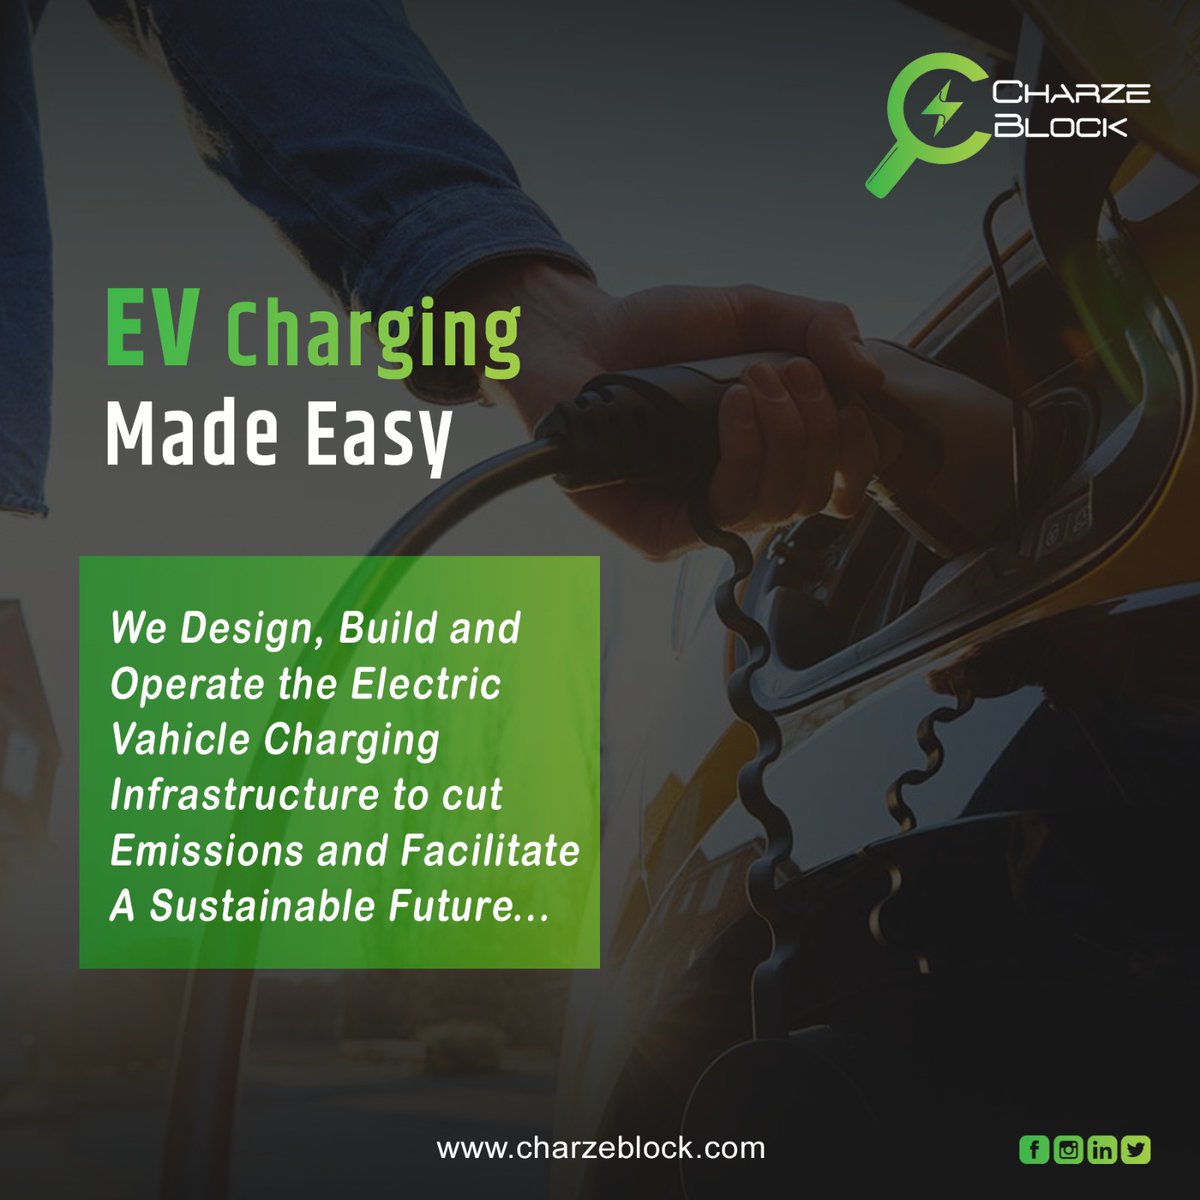 Empowering a Greener Tomorrow! 🌿⚡                                                           From design and construction to seamless operation, we're paving the way for a #sustainablefuture with #reducedemissions. 🚗🌎#EVCharging #GreenFuture #SmartTravel